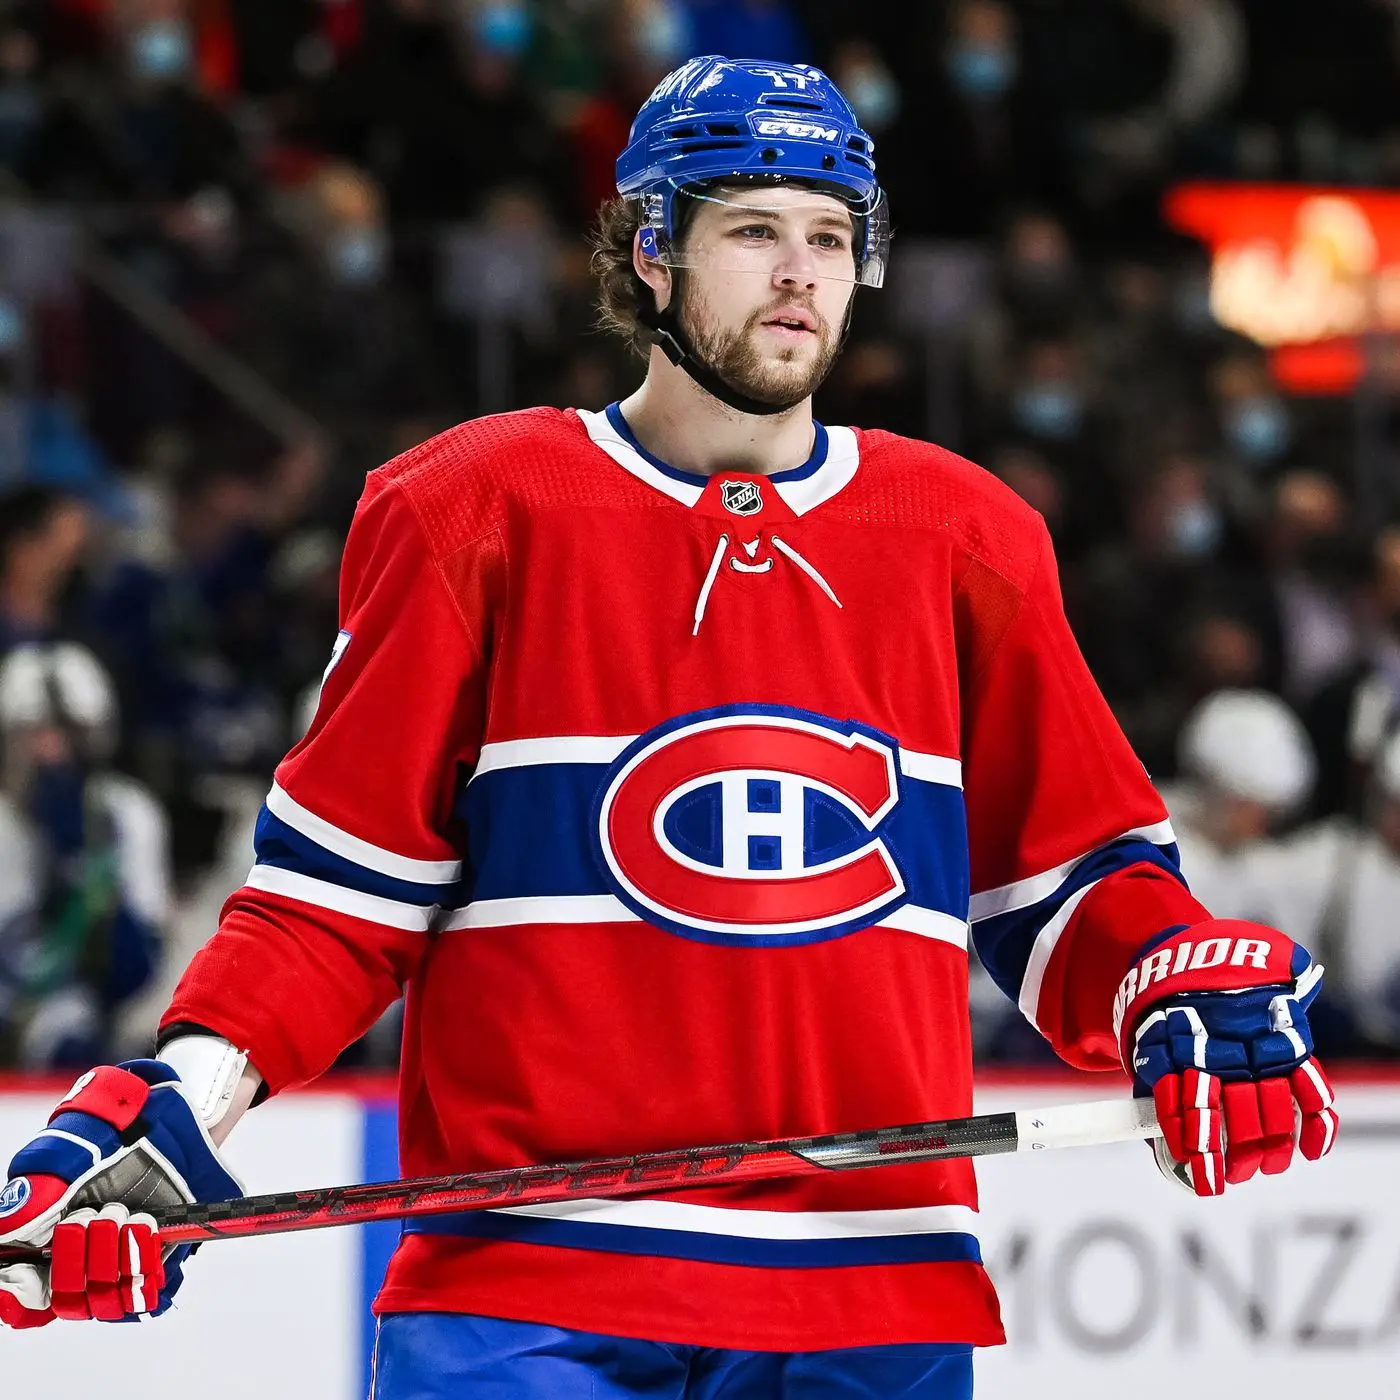 NHL athlete Josh Anderson playing hockey for the Montreal Canadiens